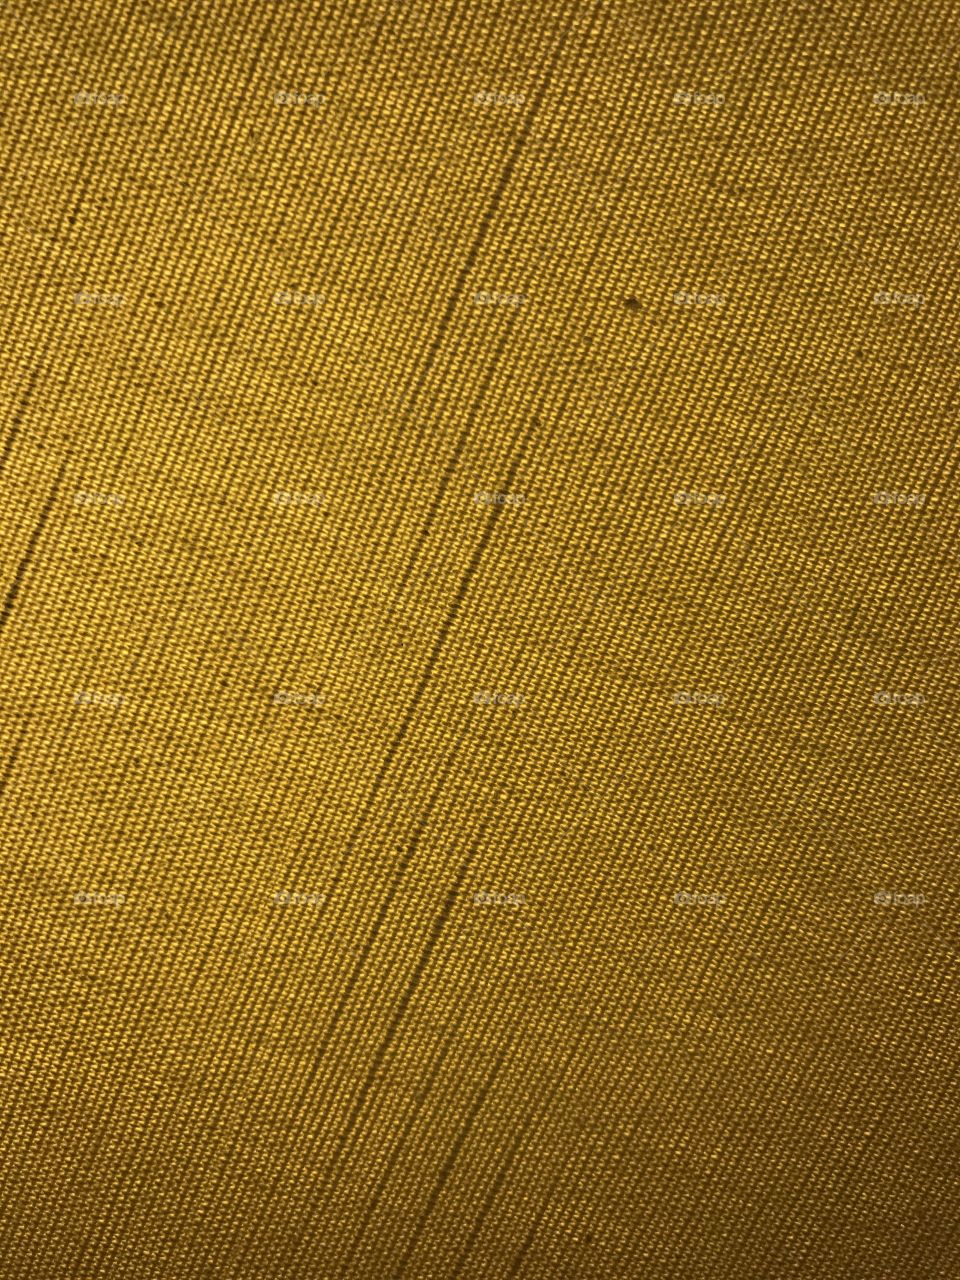 Texture/Background fabric